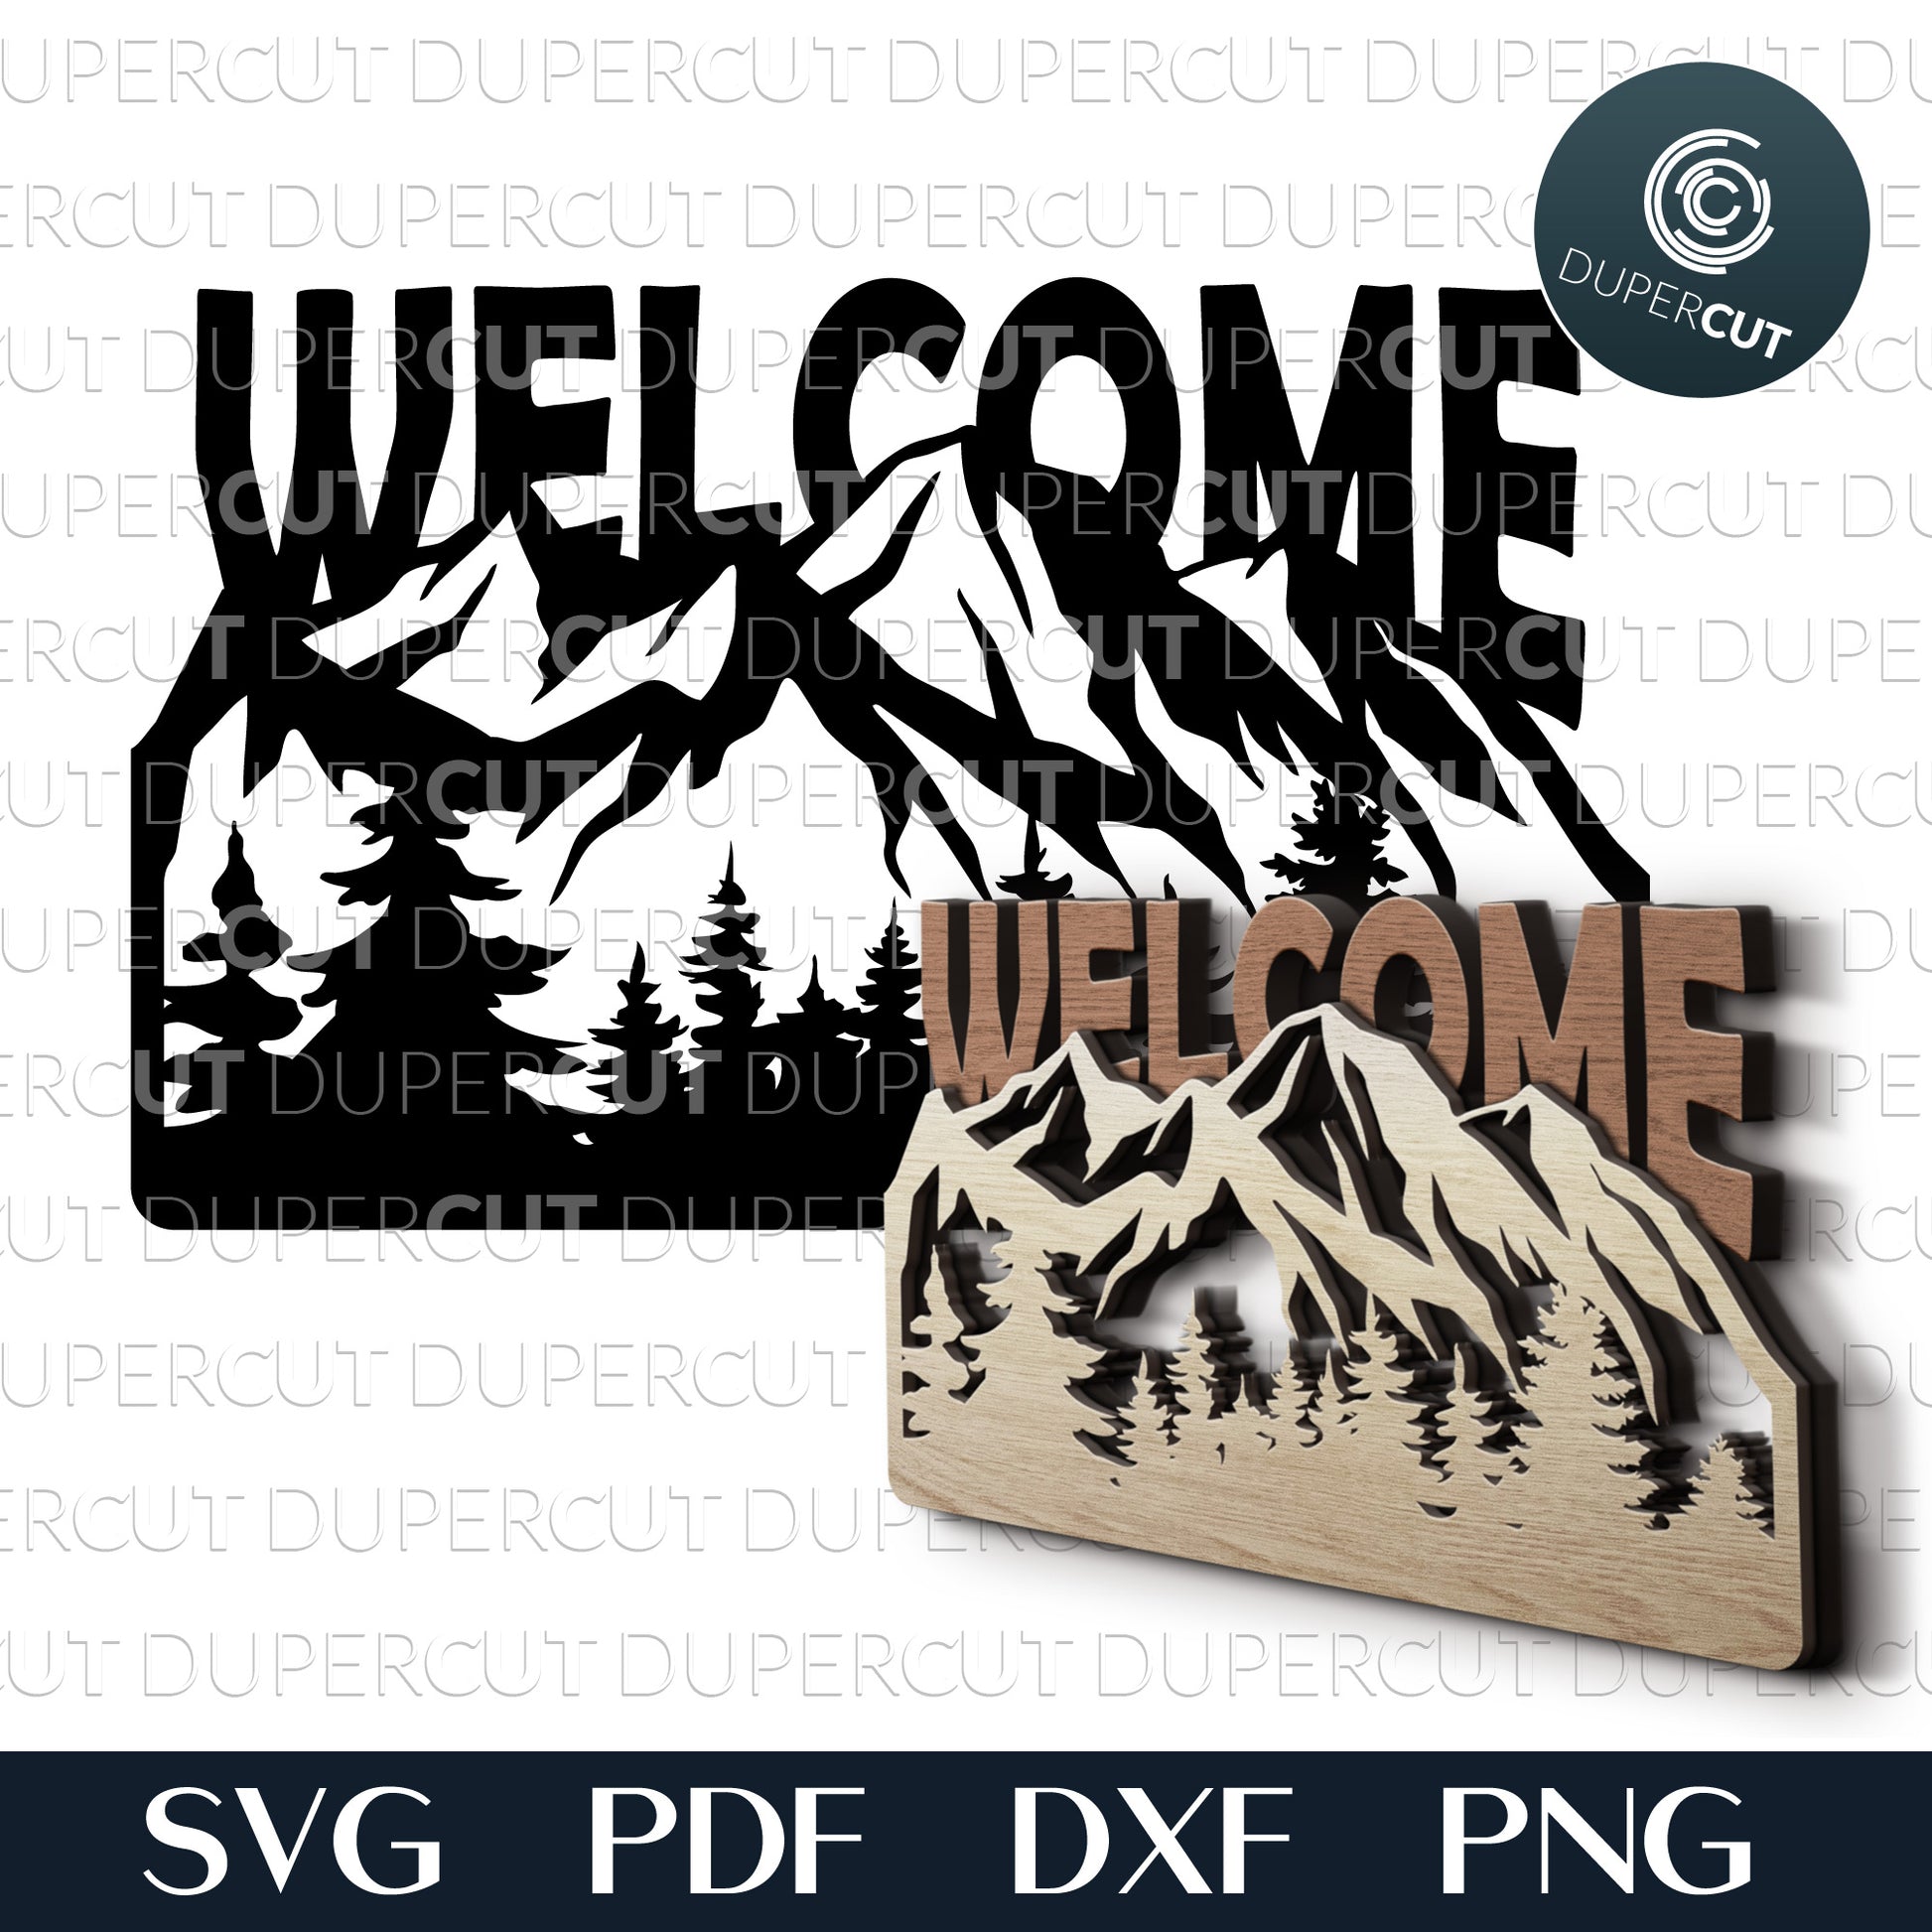 Rectangular mountains welcome sign - layered laser cutting files SVG PDF DXF templates for commercial use. Glowforge, Cricut, Silhouette Cameo, CNC plasma machines